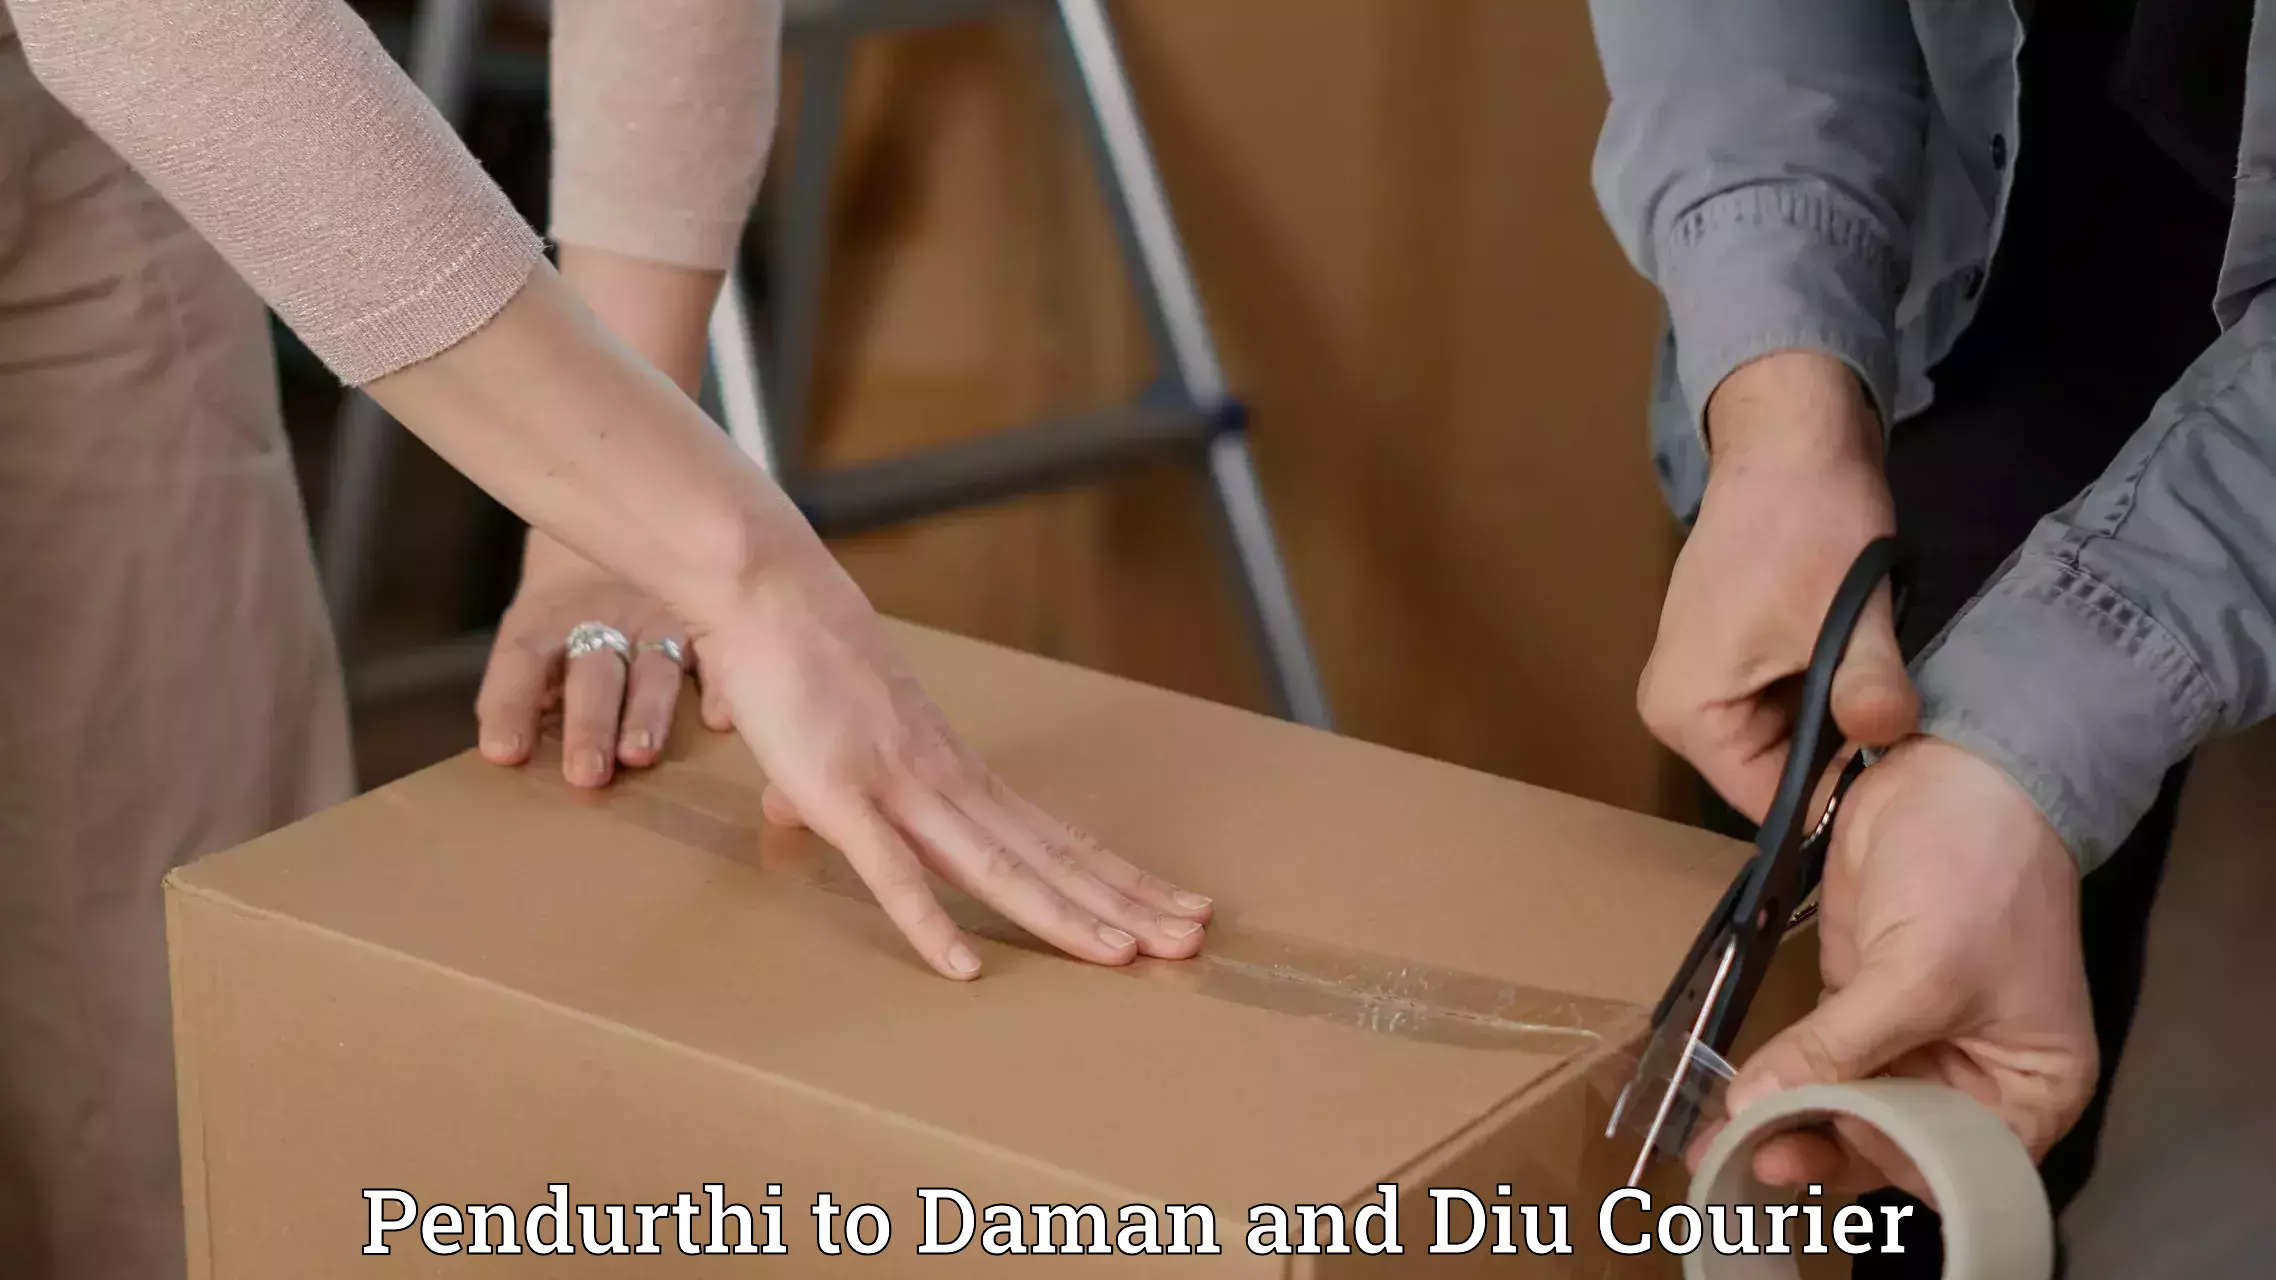 Global courier networks Pendurthi to Daman and Diu